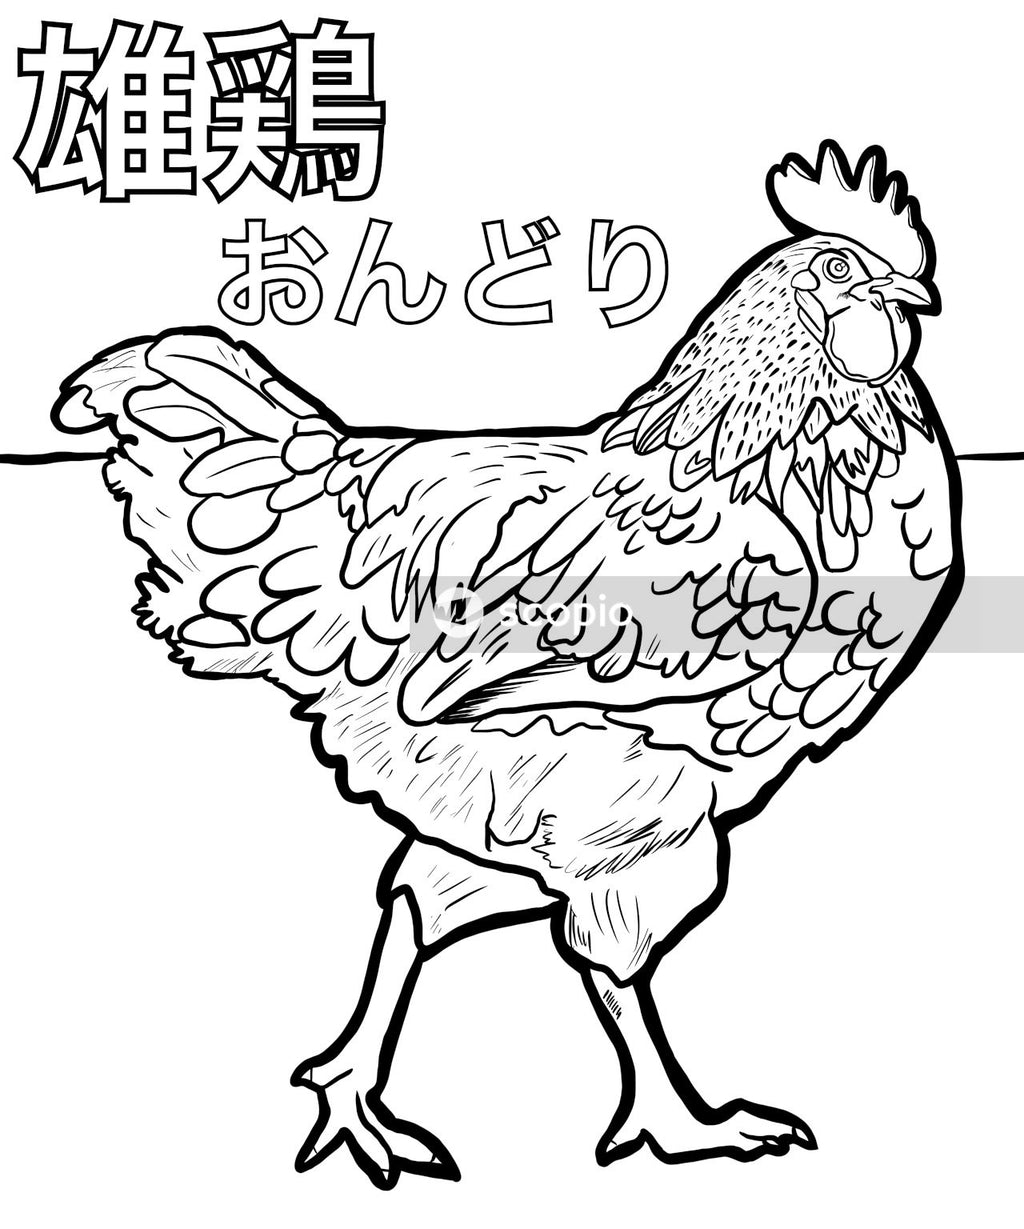 White and black rooster illustration